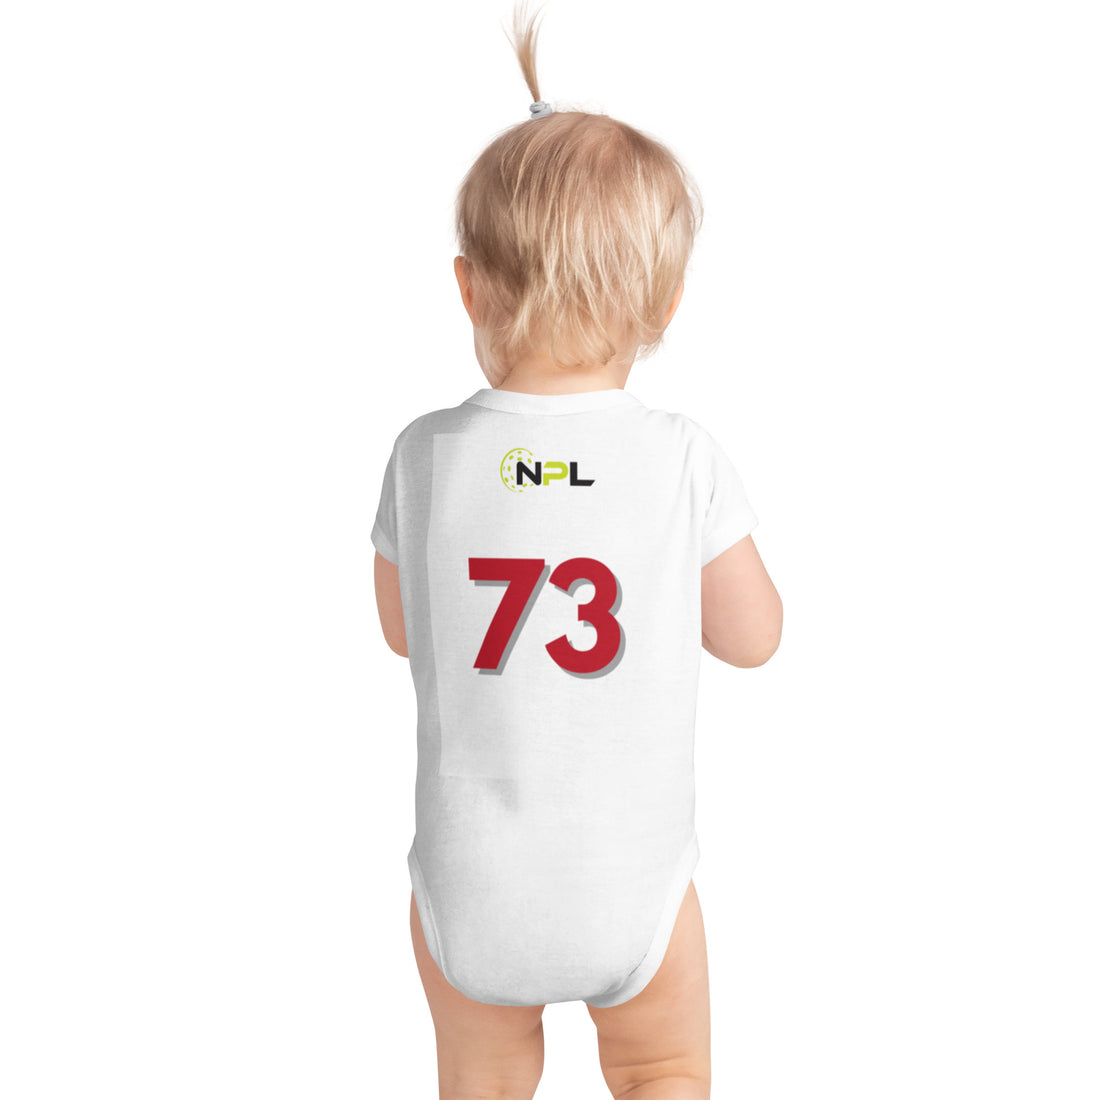 Indy Drivers™ - NPL™ Infant Bodysuit - Pickleball Pro of the Future!